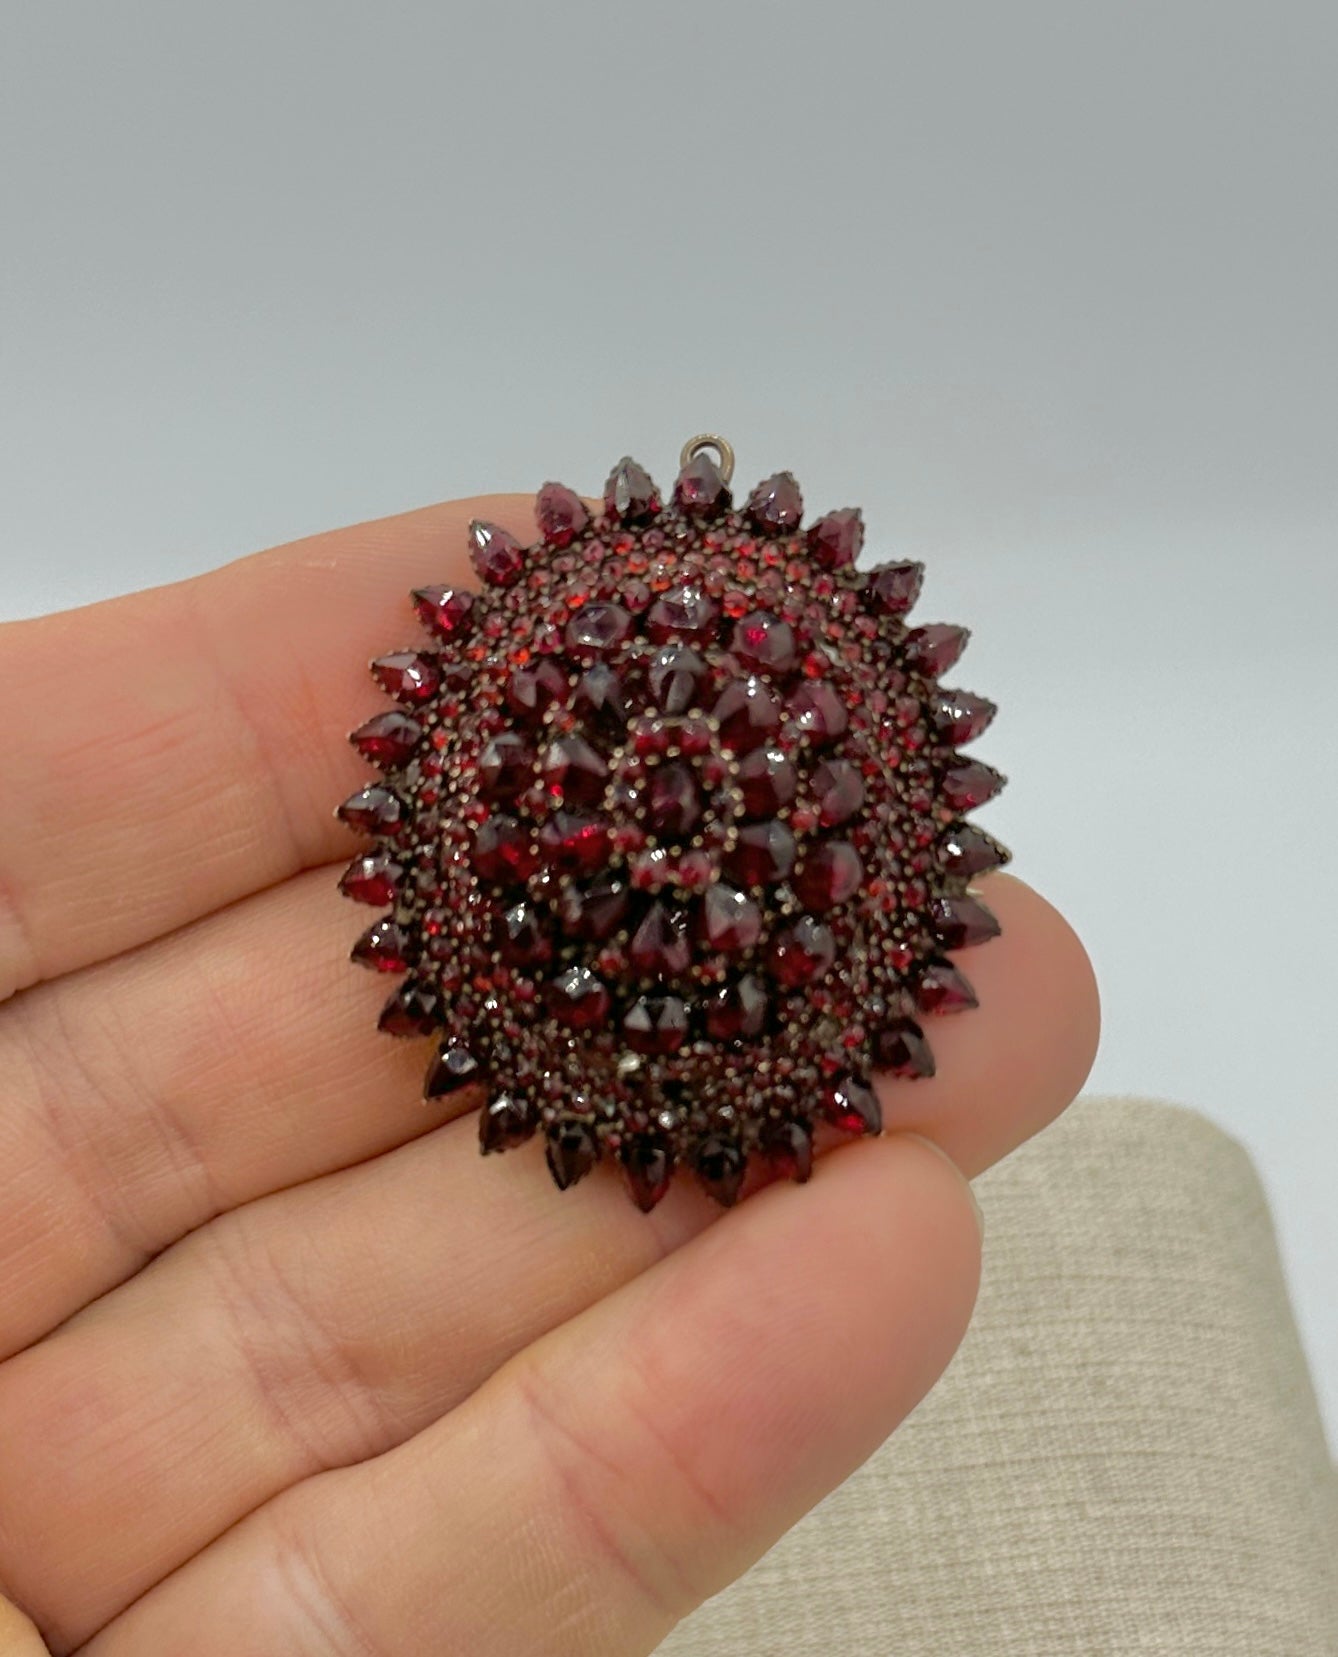 This is a gorgeous Belle Epoque - Victorian Bohemian Garnet Locket Pendant or Brooch.  The early oval locket pendant is adorned with four layers of faceted garnets.  The garnets are pear shape and round and are of absolutely magnificent blood red